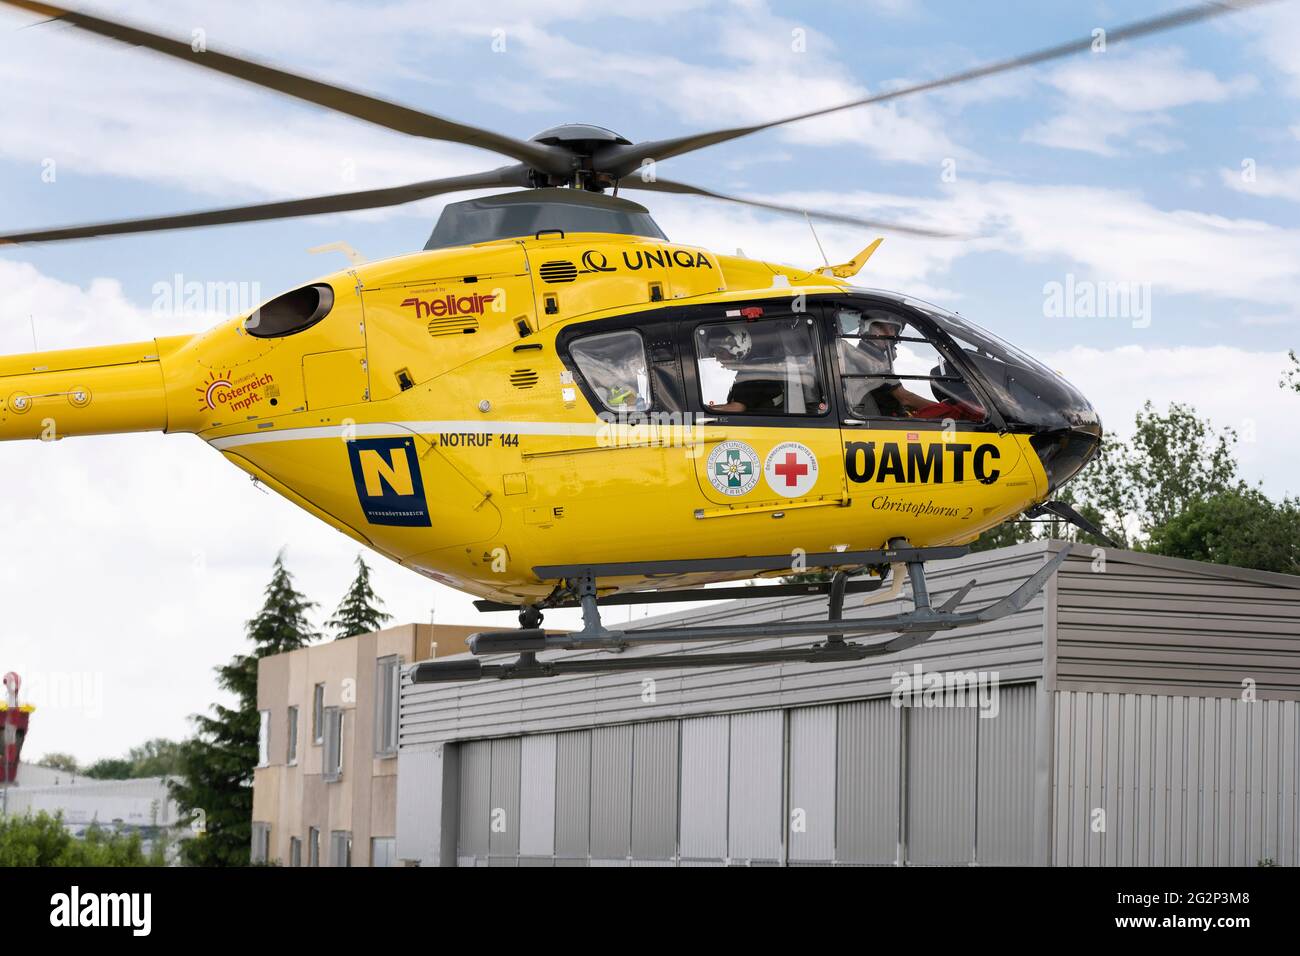 https://c8.alamy.com/comp/2G2P3M8/amtc-flugrettung-christophorus-2-the-second-emergency-medical-helicopter-in-austria-operating-from-gneixendorf-airfield-lower-austria-2G2P3M8.jpg